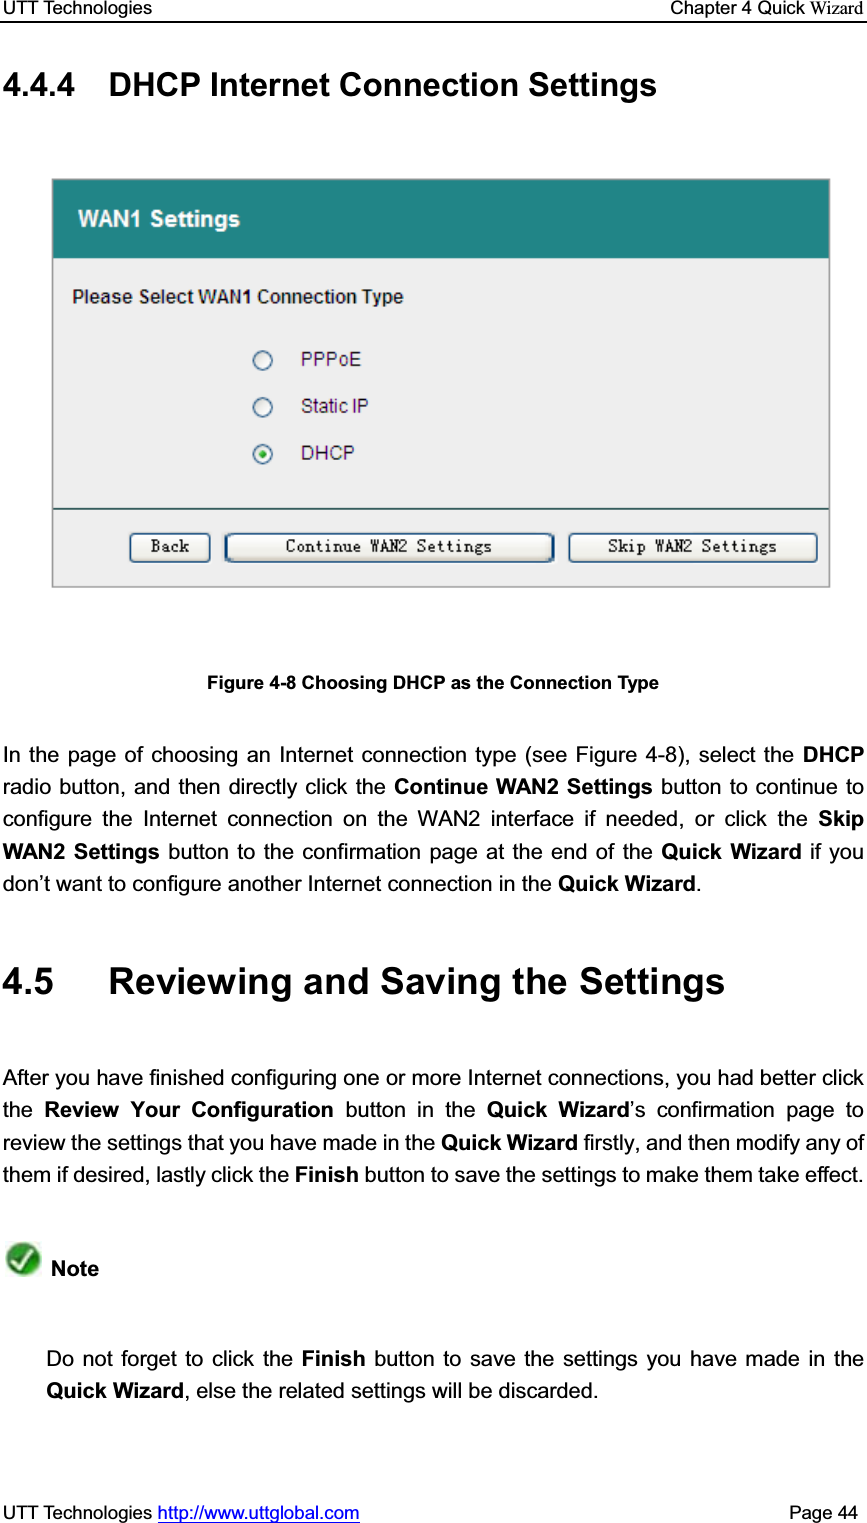 UTT Technologies    Chapter 4 Quick WizardUTT Technologies http://www.uttglobal.com                                              Page 44 4.4.4  DHCP Internet Connection Settings Figure 4-8 Choosing DHCP as the Connection Type In the page of choosing an Internet connection type (see Figure 4-8), select the DHCP radio button, and then directly click the Continue WAN2 Settings button to continue to configure the Internet connection on the WAN2 interface if needed, or click the Skip WAN2 Settings button to the confirmation page at the end of the Quick Wizard if you don¶t want to configure another Internet connection in the Quick Wizard.4.5  Reviewing and Saving the Settings After you have finished configuring one or more Internet connections, you had better clickthe Review Your Configuration button in the Quick Wizard¶s confirmation page to review the settings that you have made in the Quick Wizard firstly, and then modify any of them if desired, lastly click the Finish button to save the settings to make them take effect.   Note Do not forget to click the Finish button to save the settings you have made in theQuick Wizard, else the related settings will be discarded.   